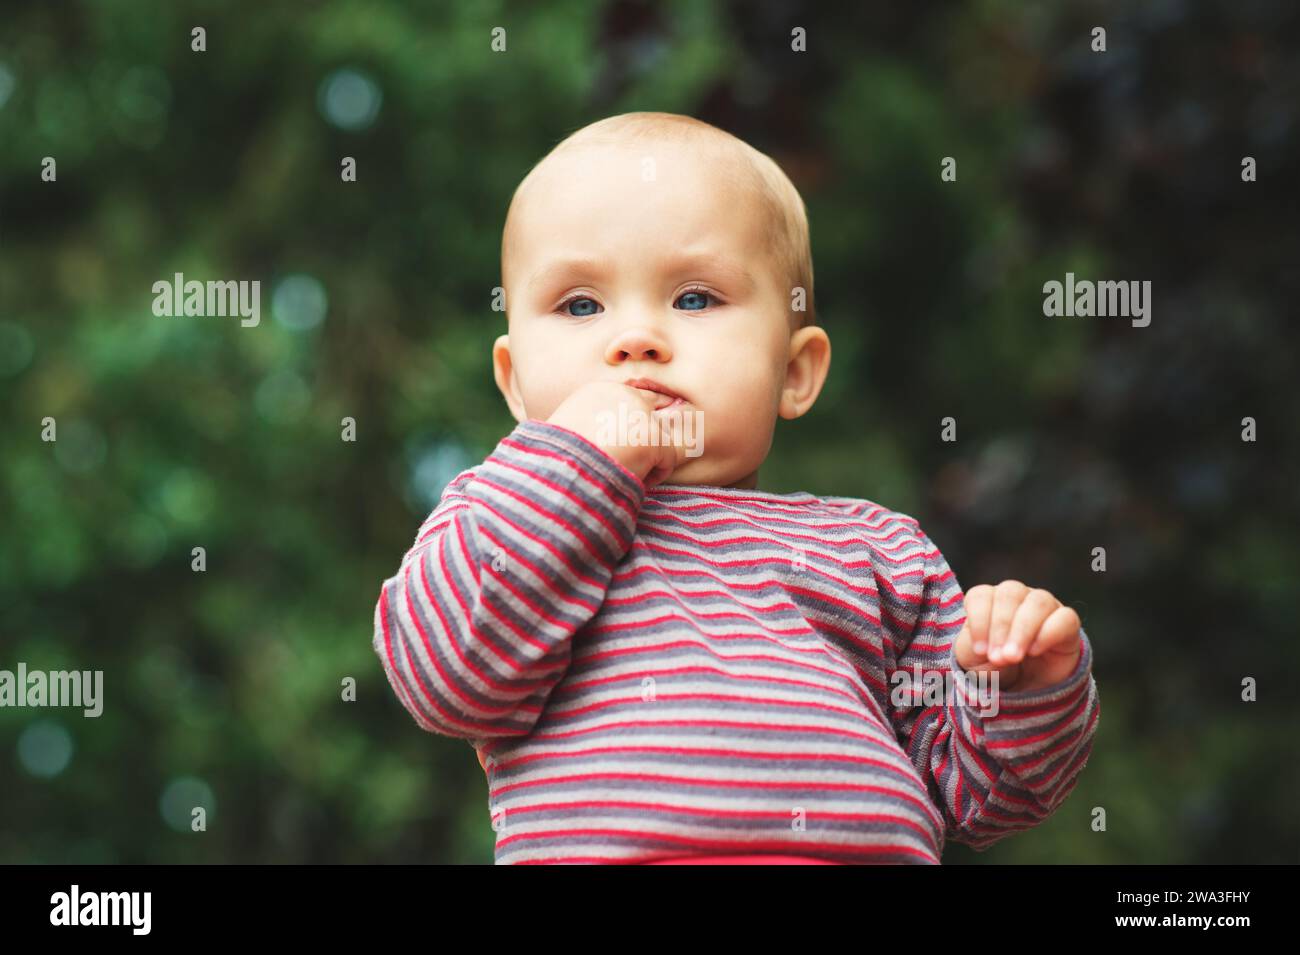 Outdoor close up portrait of cute little baby girl Stock Photo